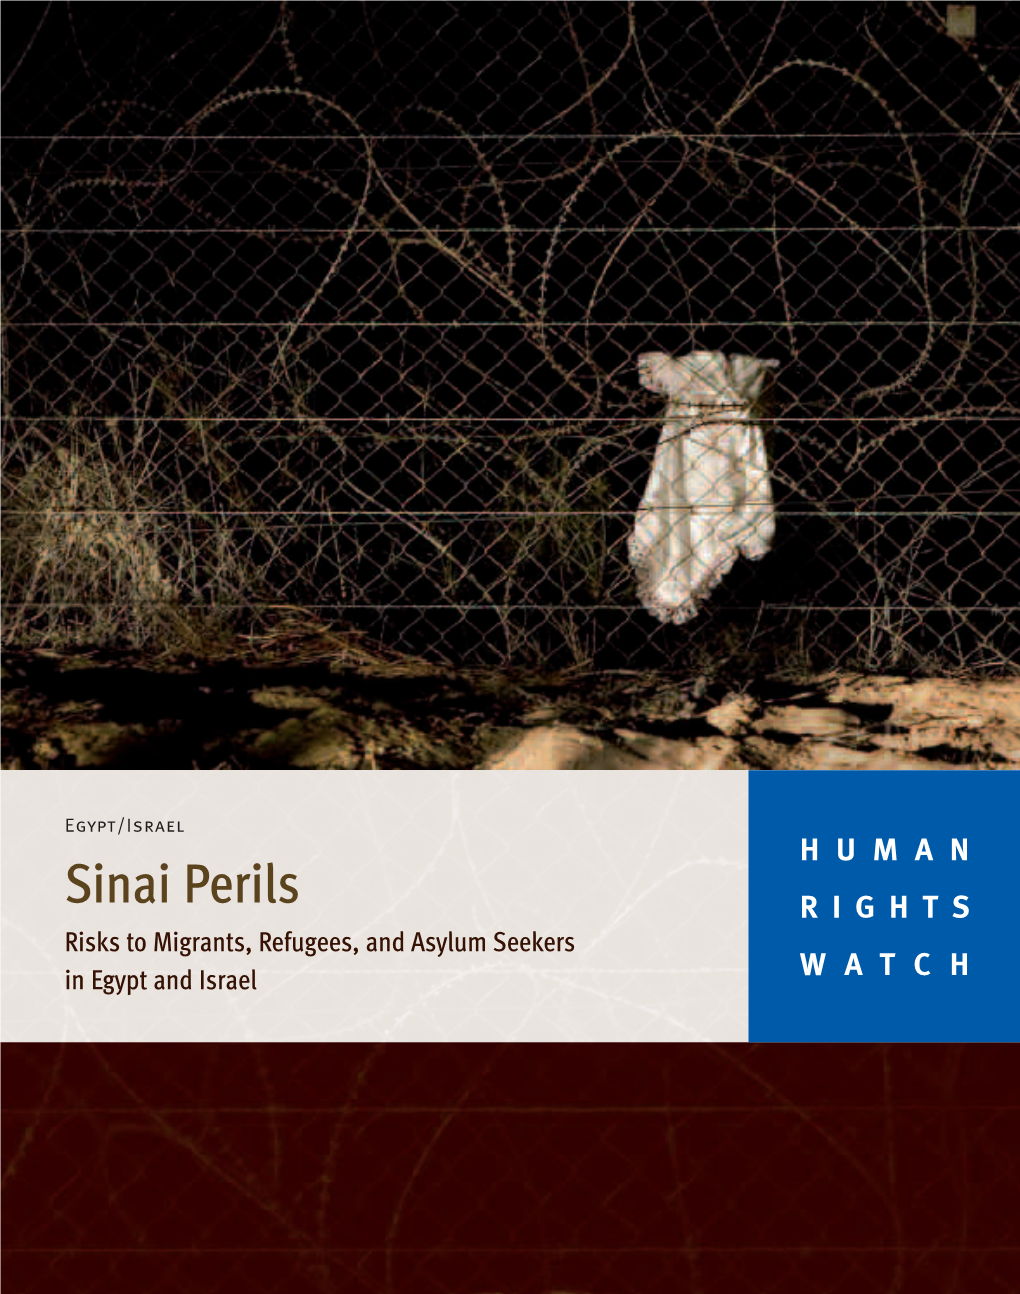 Sinai Perils RIGHTS Risks to Migrants, Refugees, and Asylum Seekers in Egypt and Israel WATCH